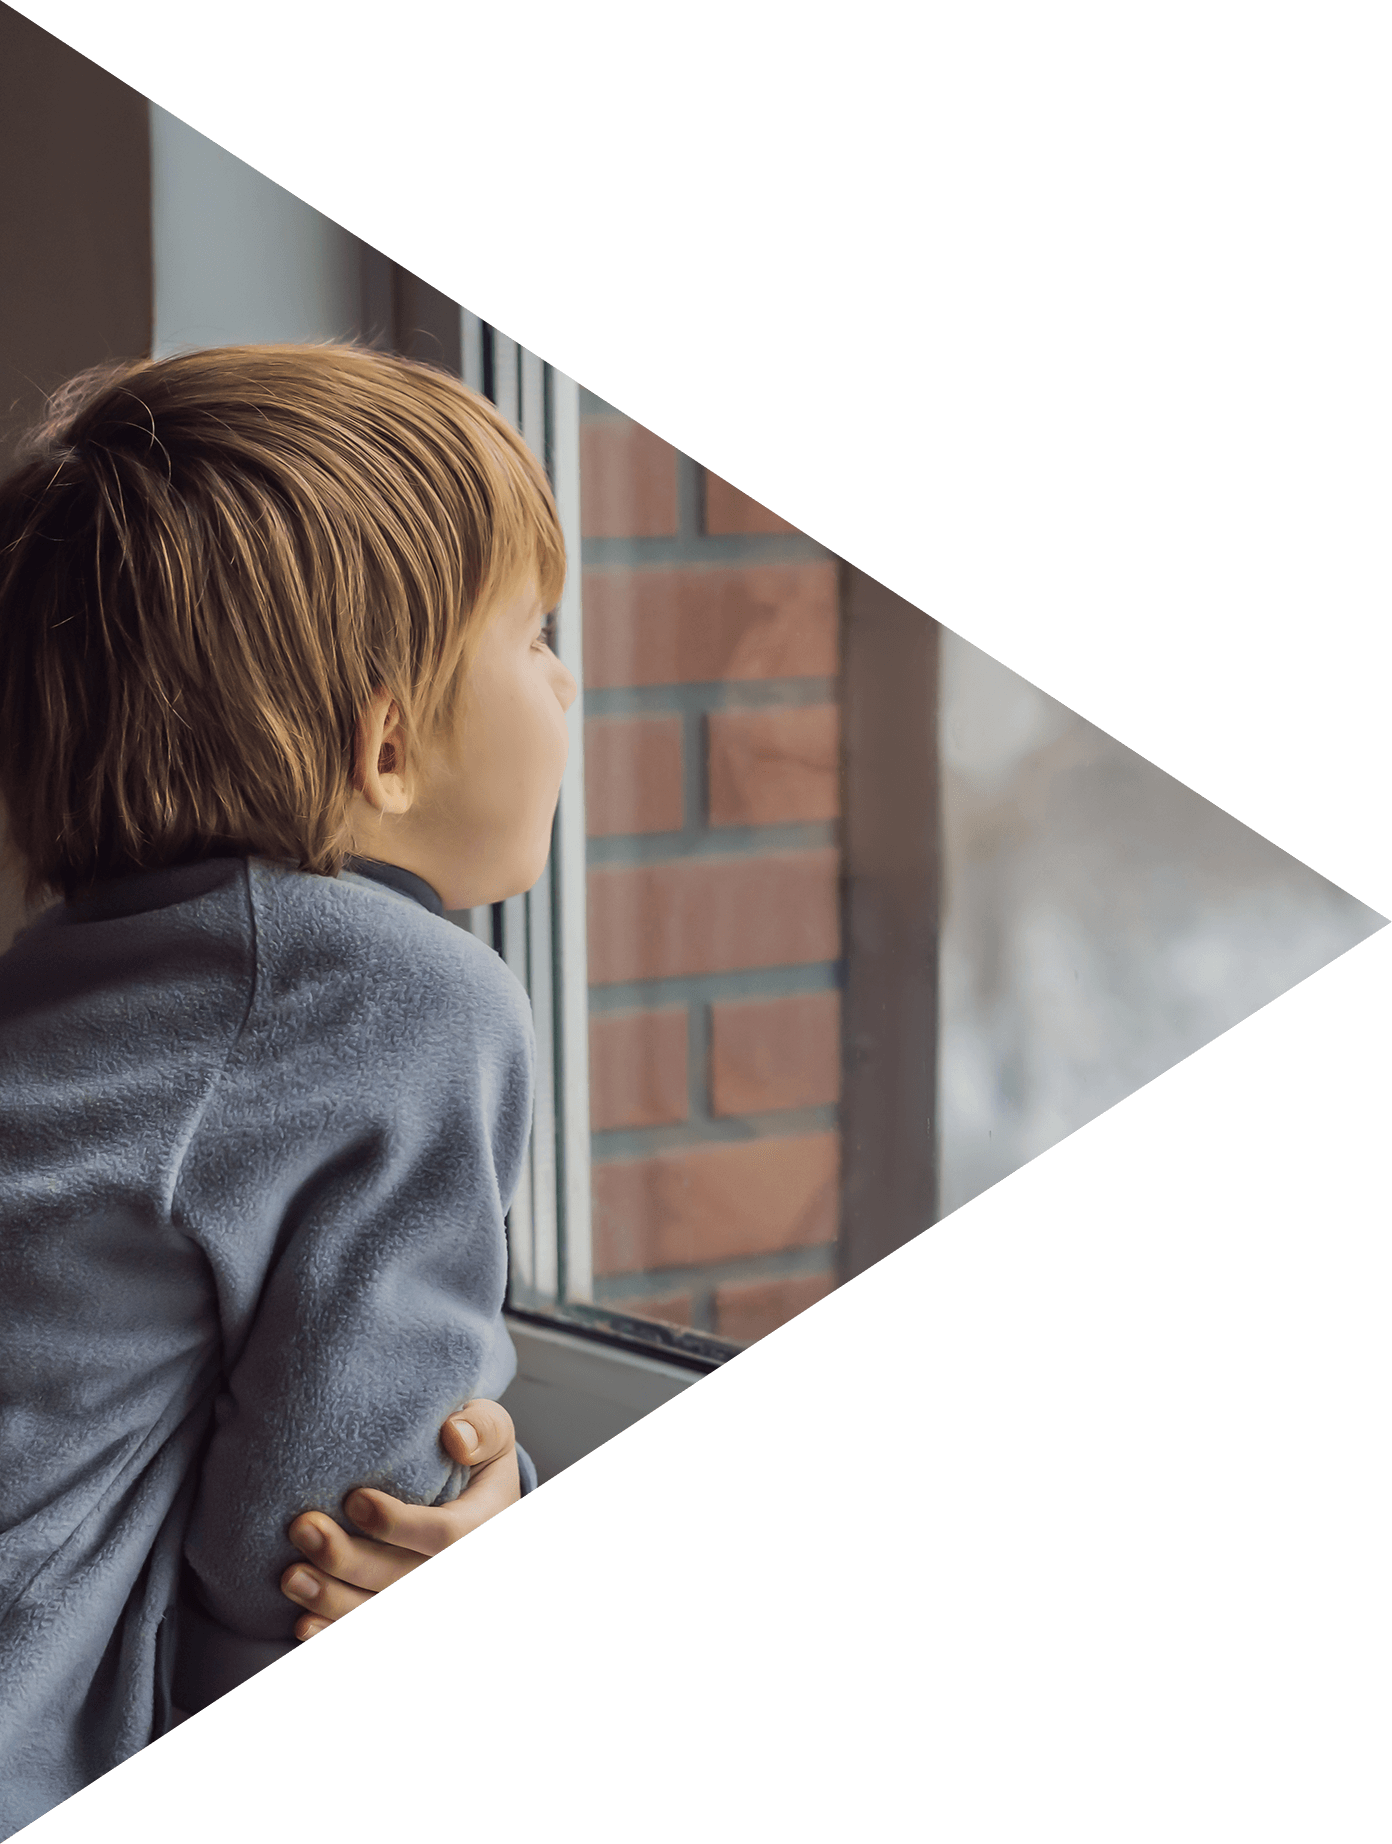 Image showing a boy looking out the window